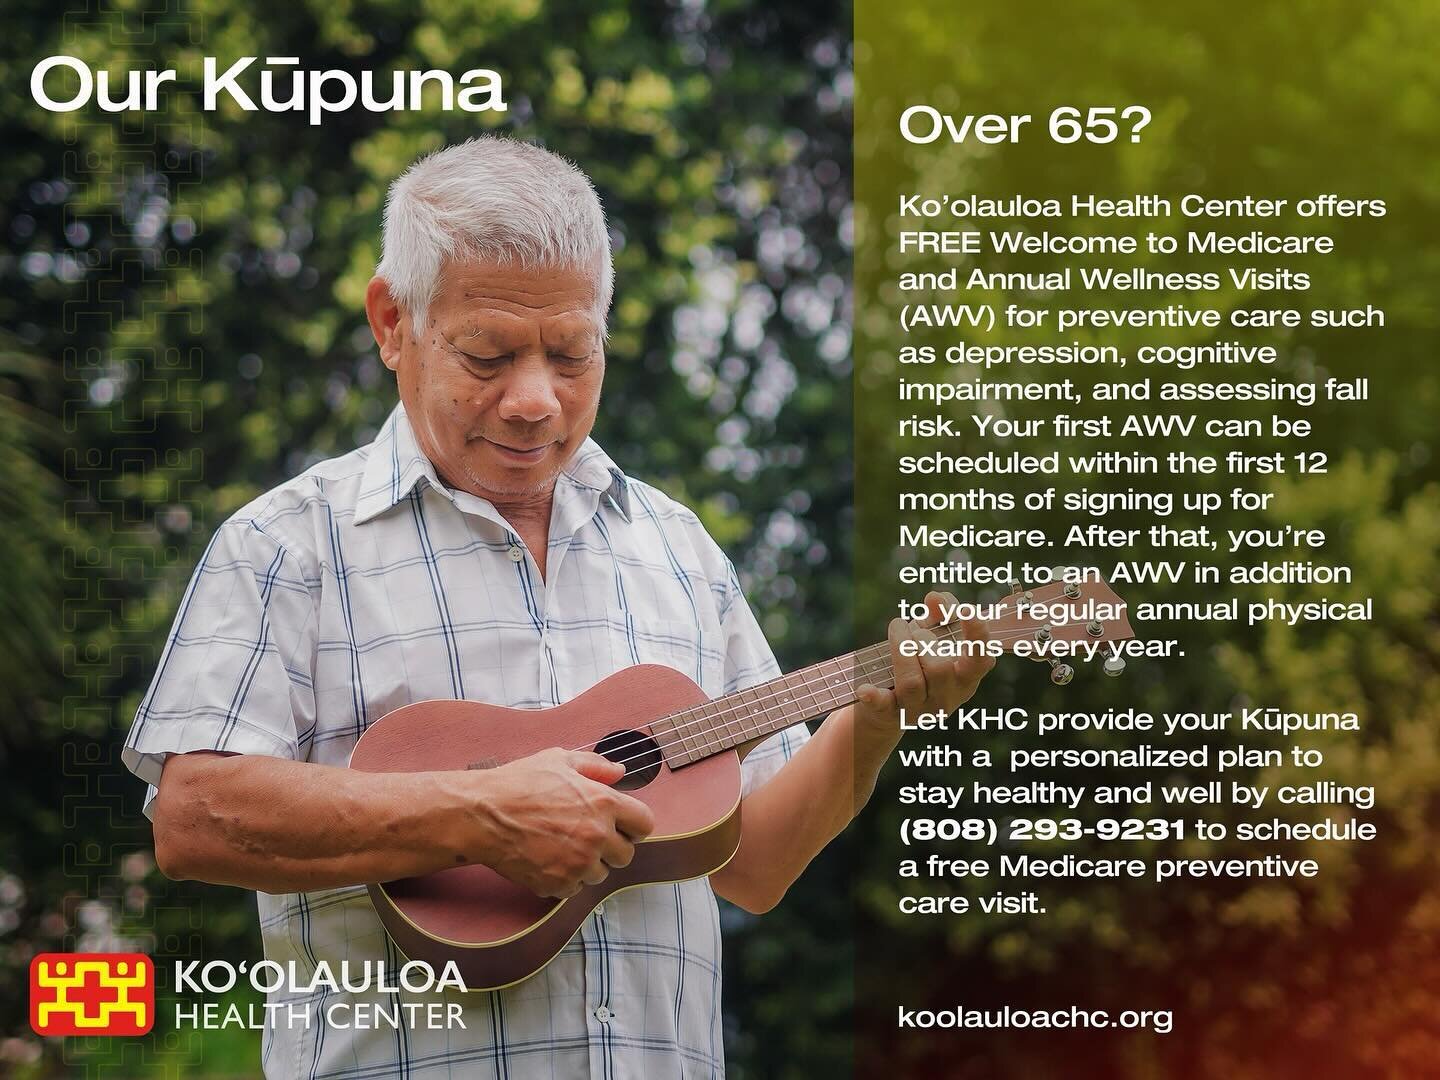 Aloha &lsquo;Ohana,

Are you over 65?

Ko&rsquo;olauloa Health Center offers FREE Welcome to Medicare and Annual Wellness Visits (AW) for preventive care such as depression, cognitive impairment, and assessing fall risk. Your first AW can be schedule